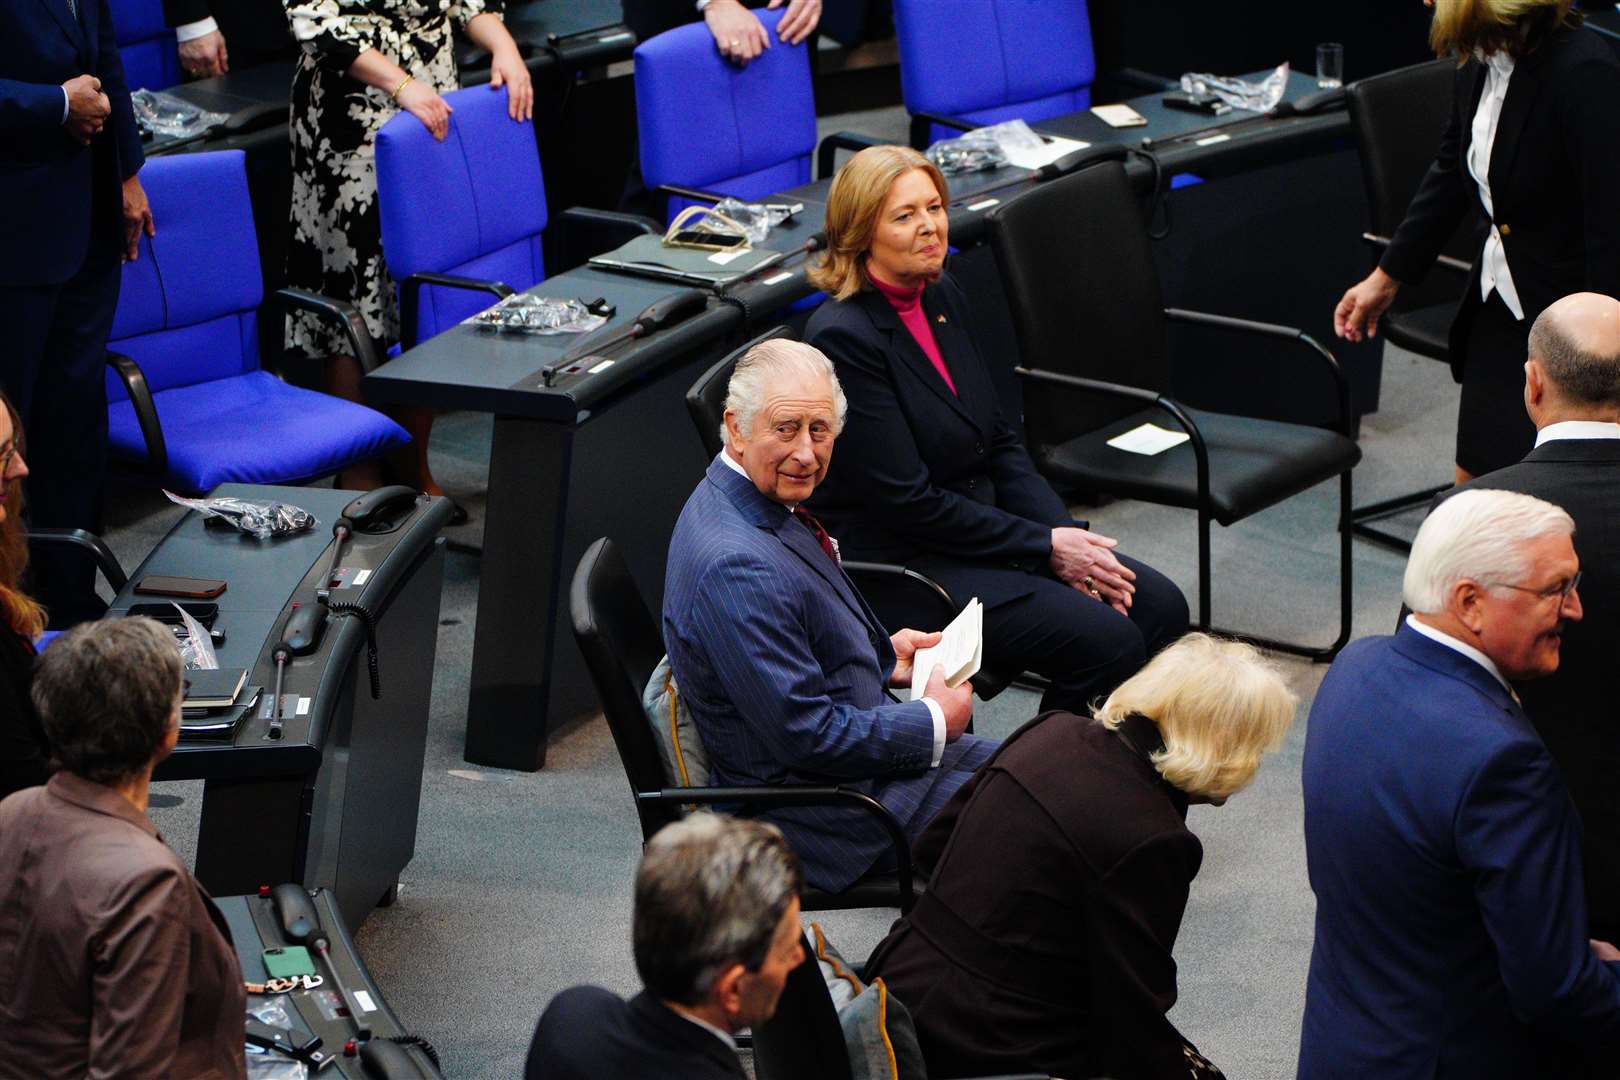 The King during a visit to the Bundestag, the German federal parliament in Berlin, in March (Ben Birchall/PA)